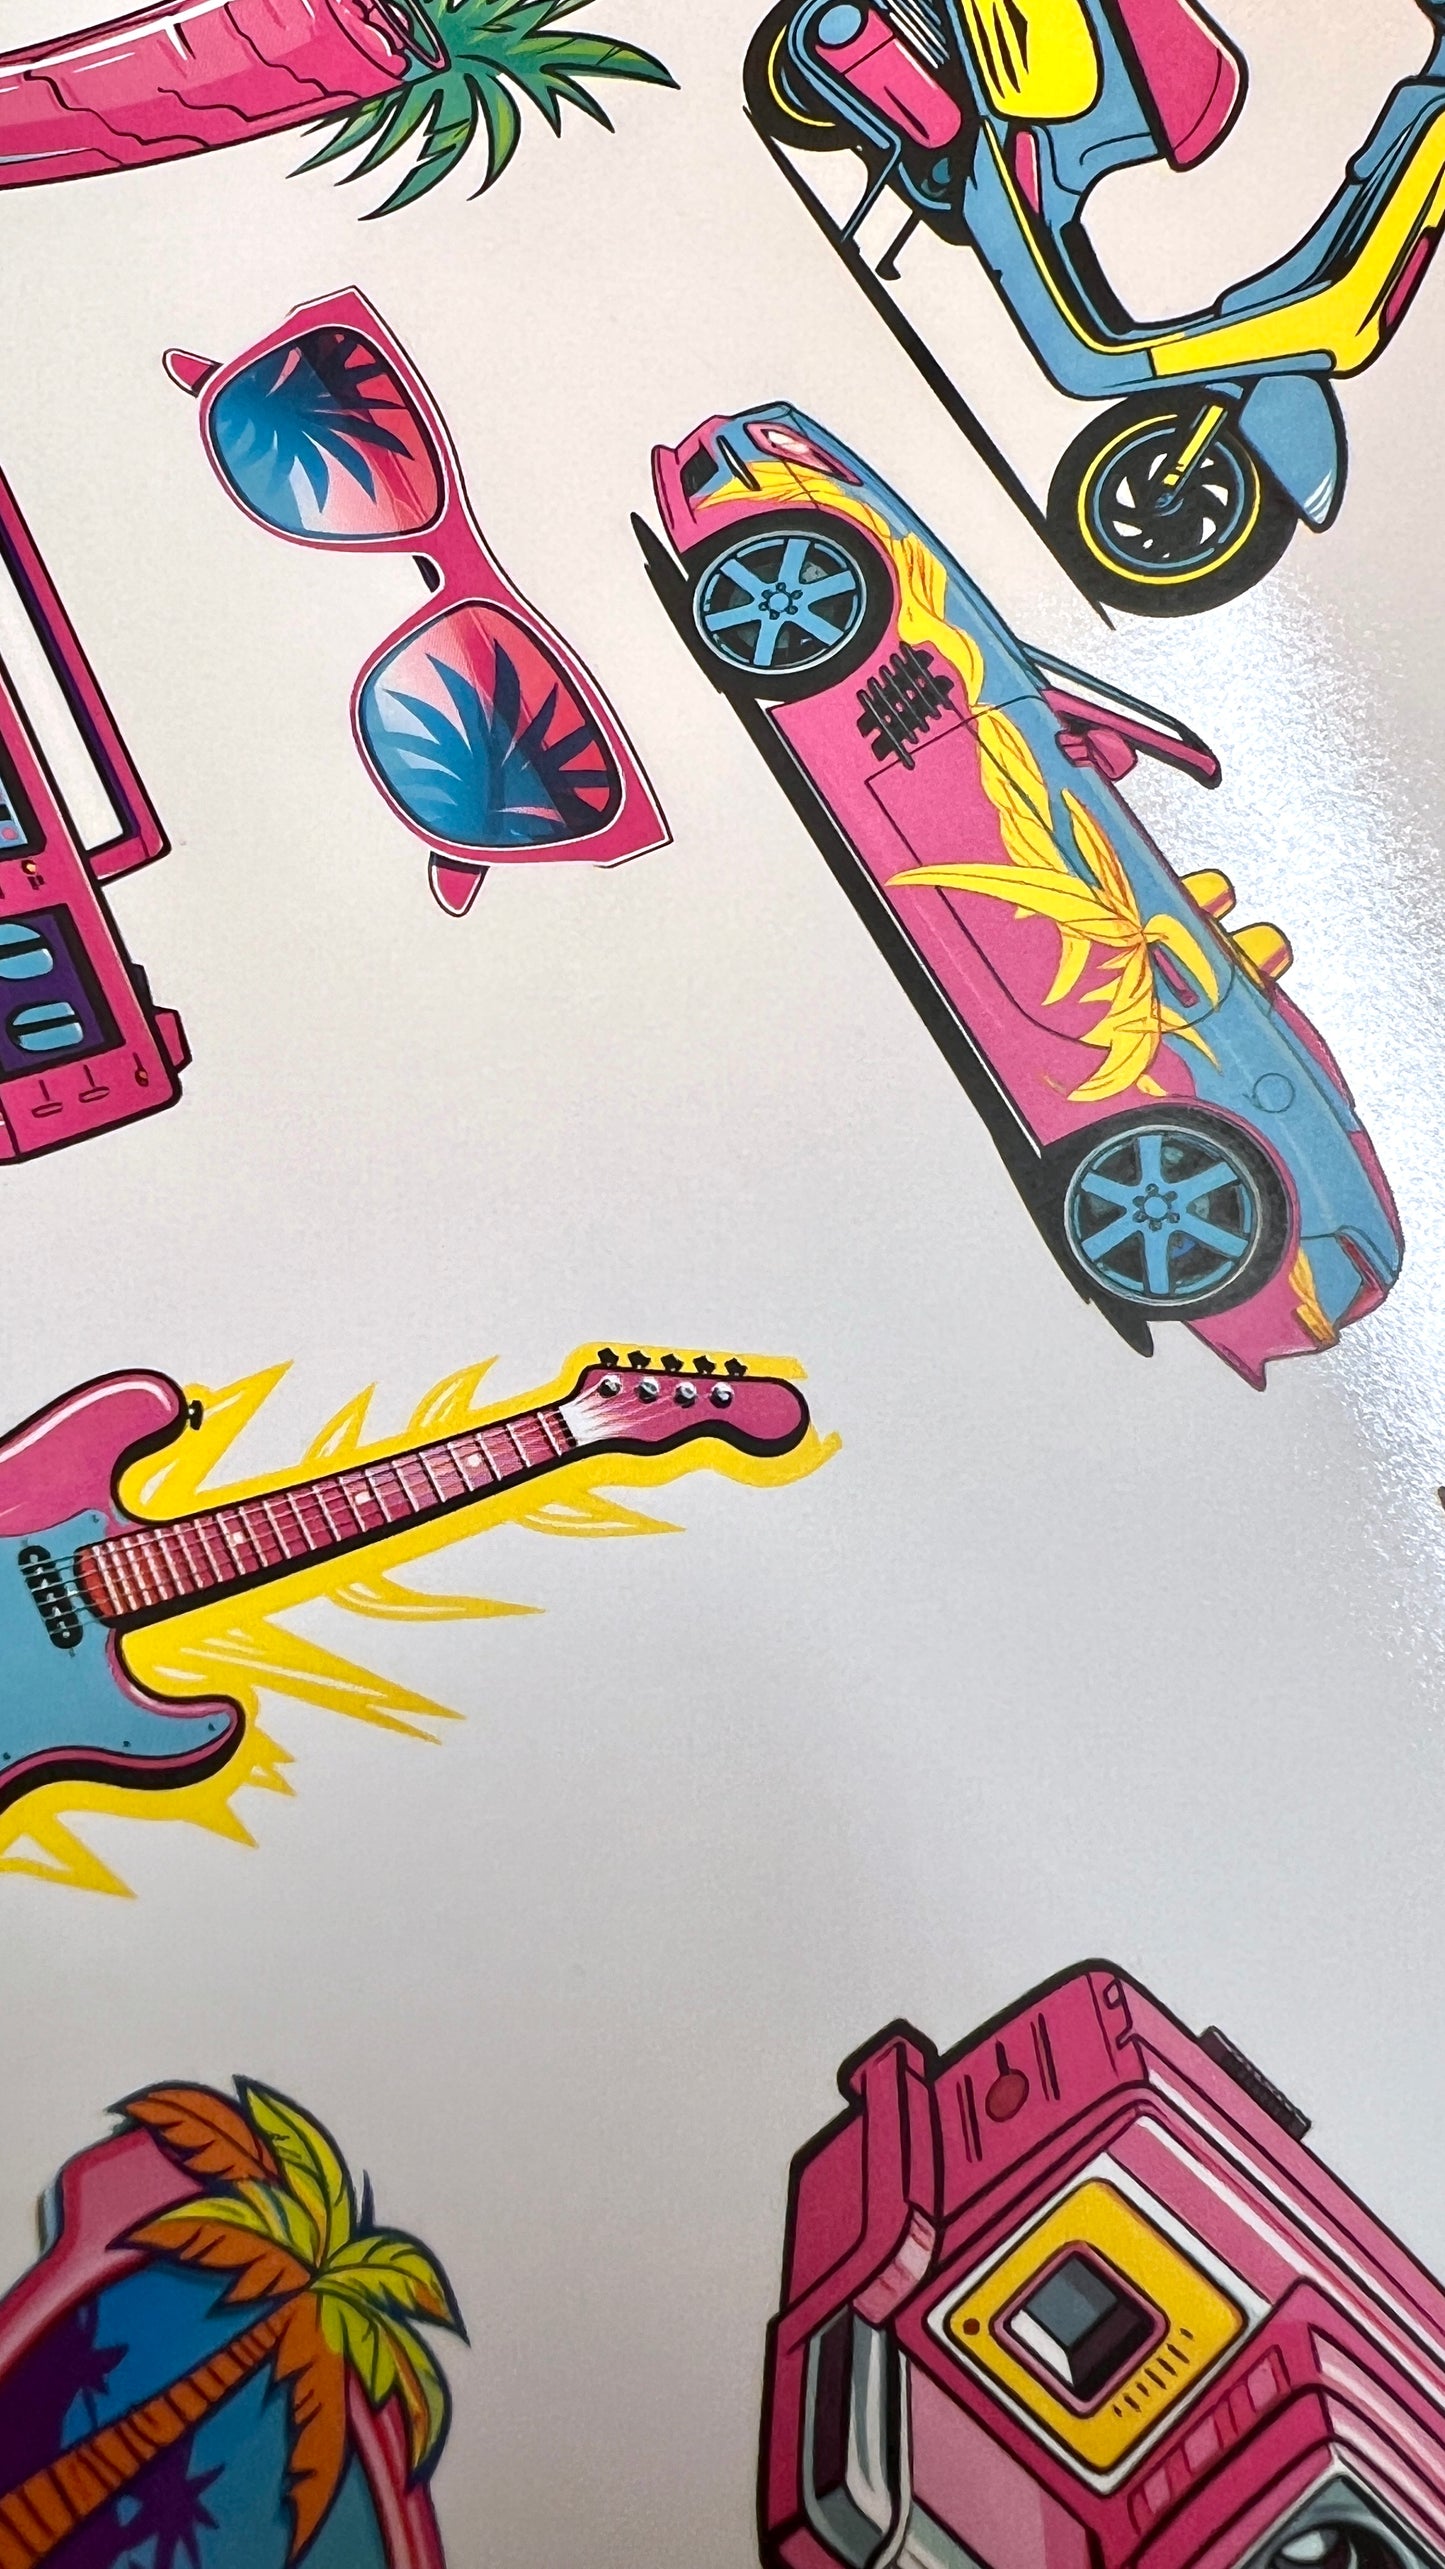 Custom Waterslide Decals with WHITE UNDERPRINT For DARK Surfaces - Full Colour Digital Laser Printed Transfers - Ready-To-Apply